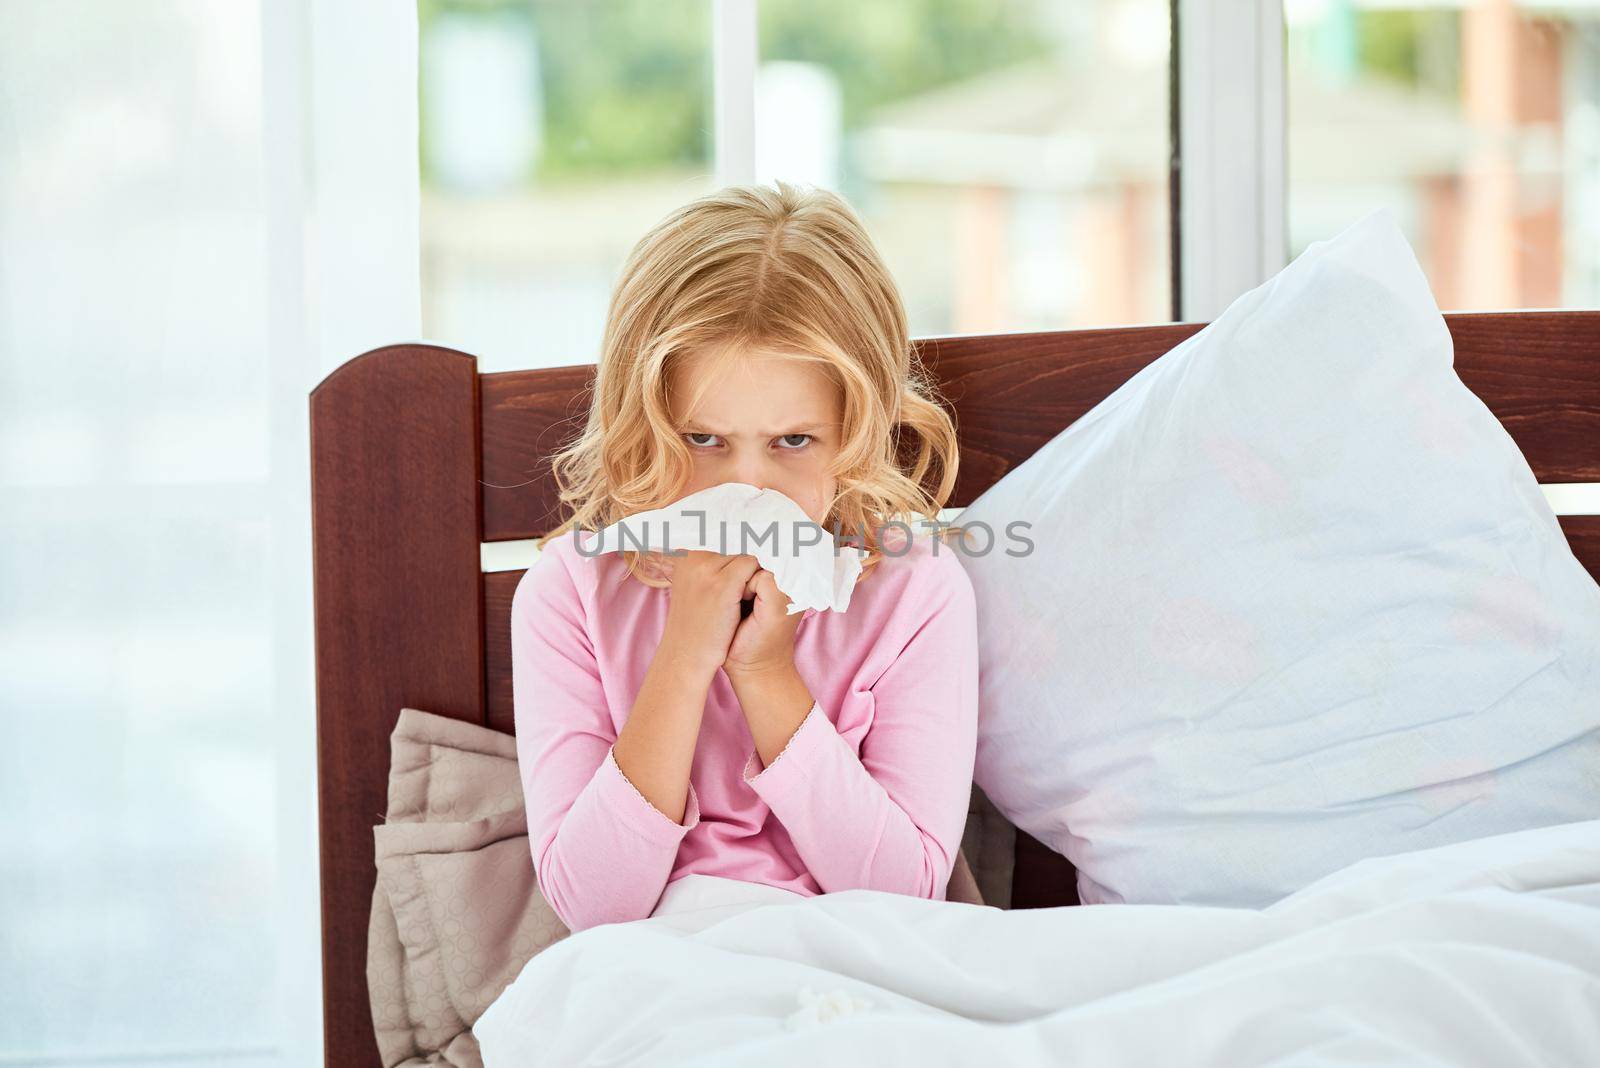 Little girl with runny nose suffering from cold or flu while lying in bed at home. Virus disease. Coronavirus concept. Healthcare concept